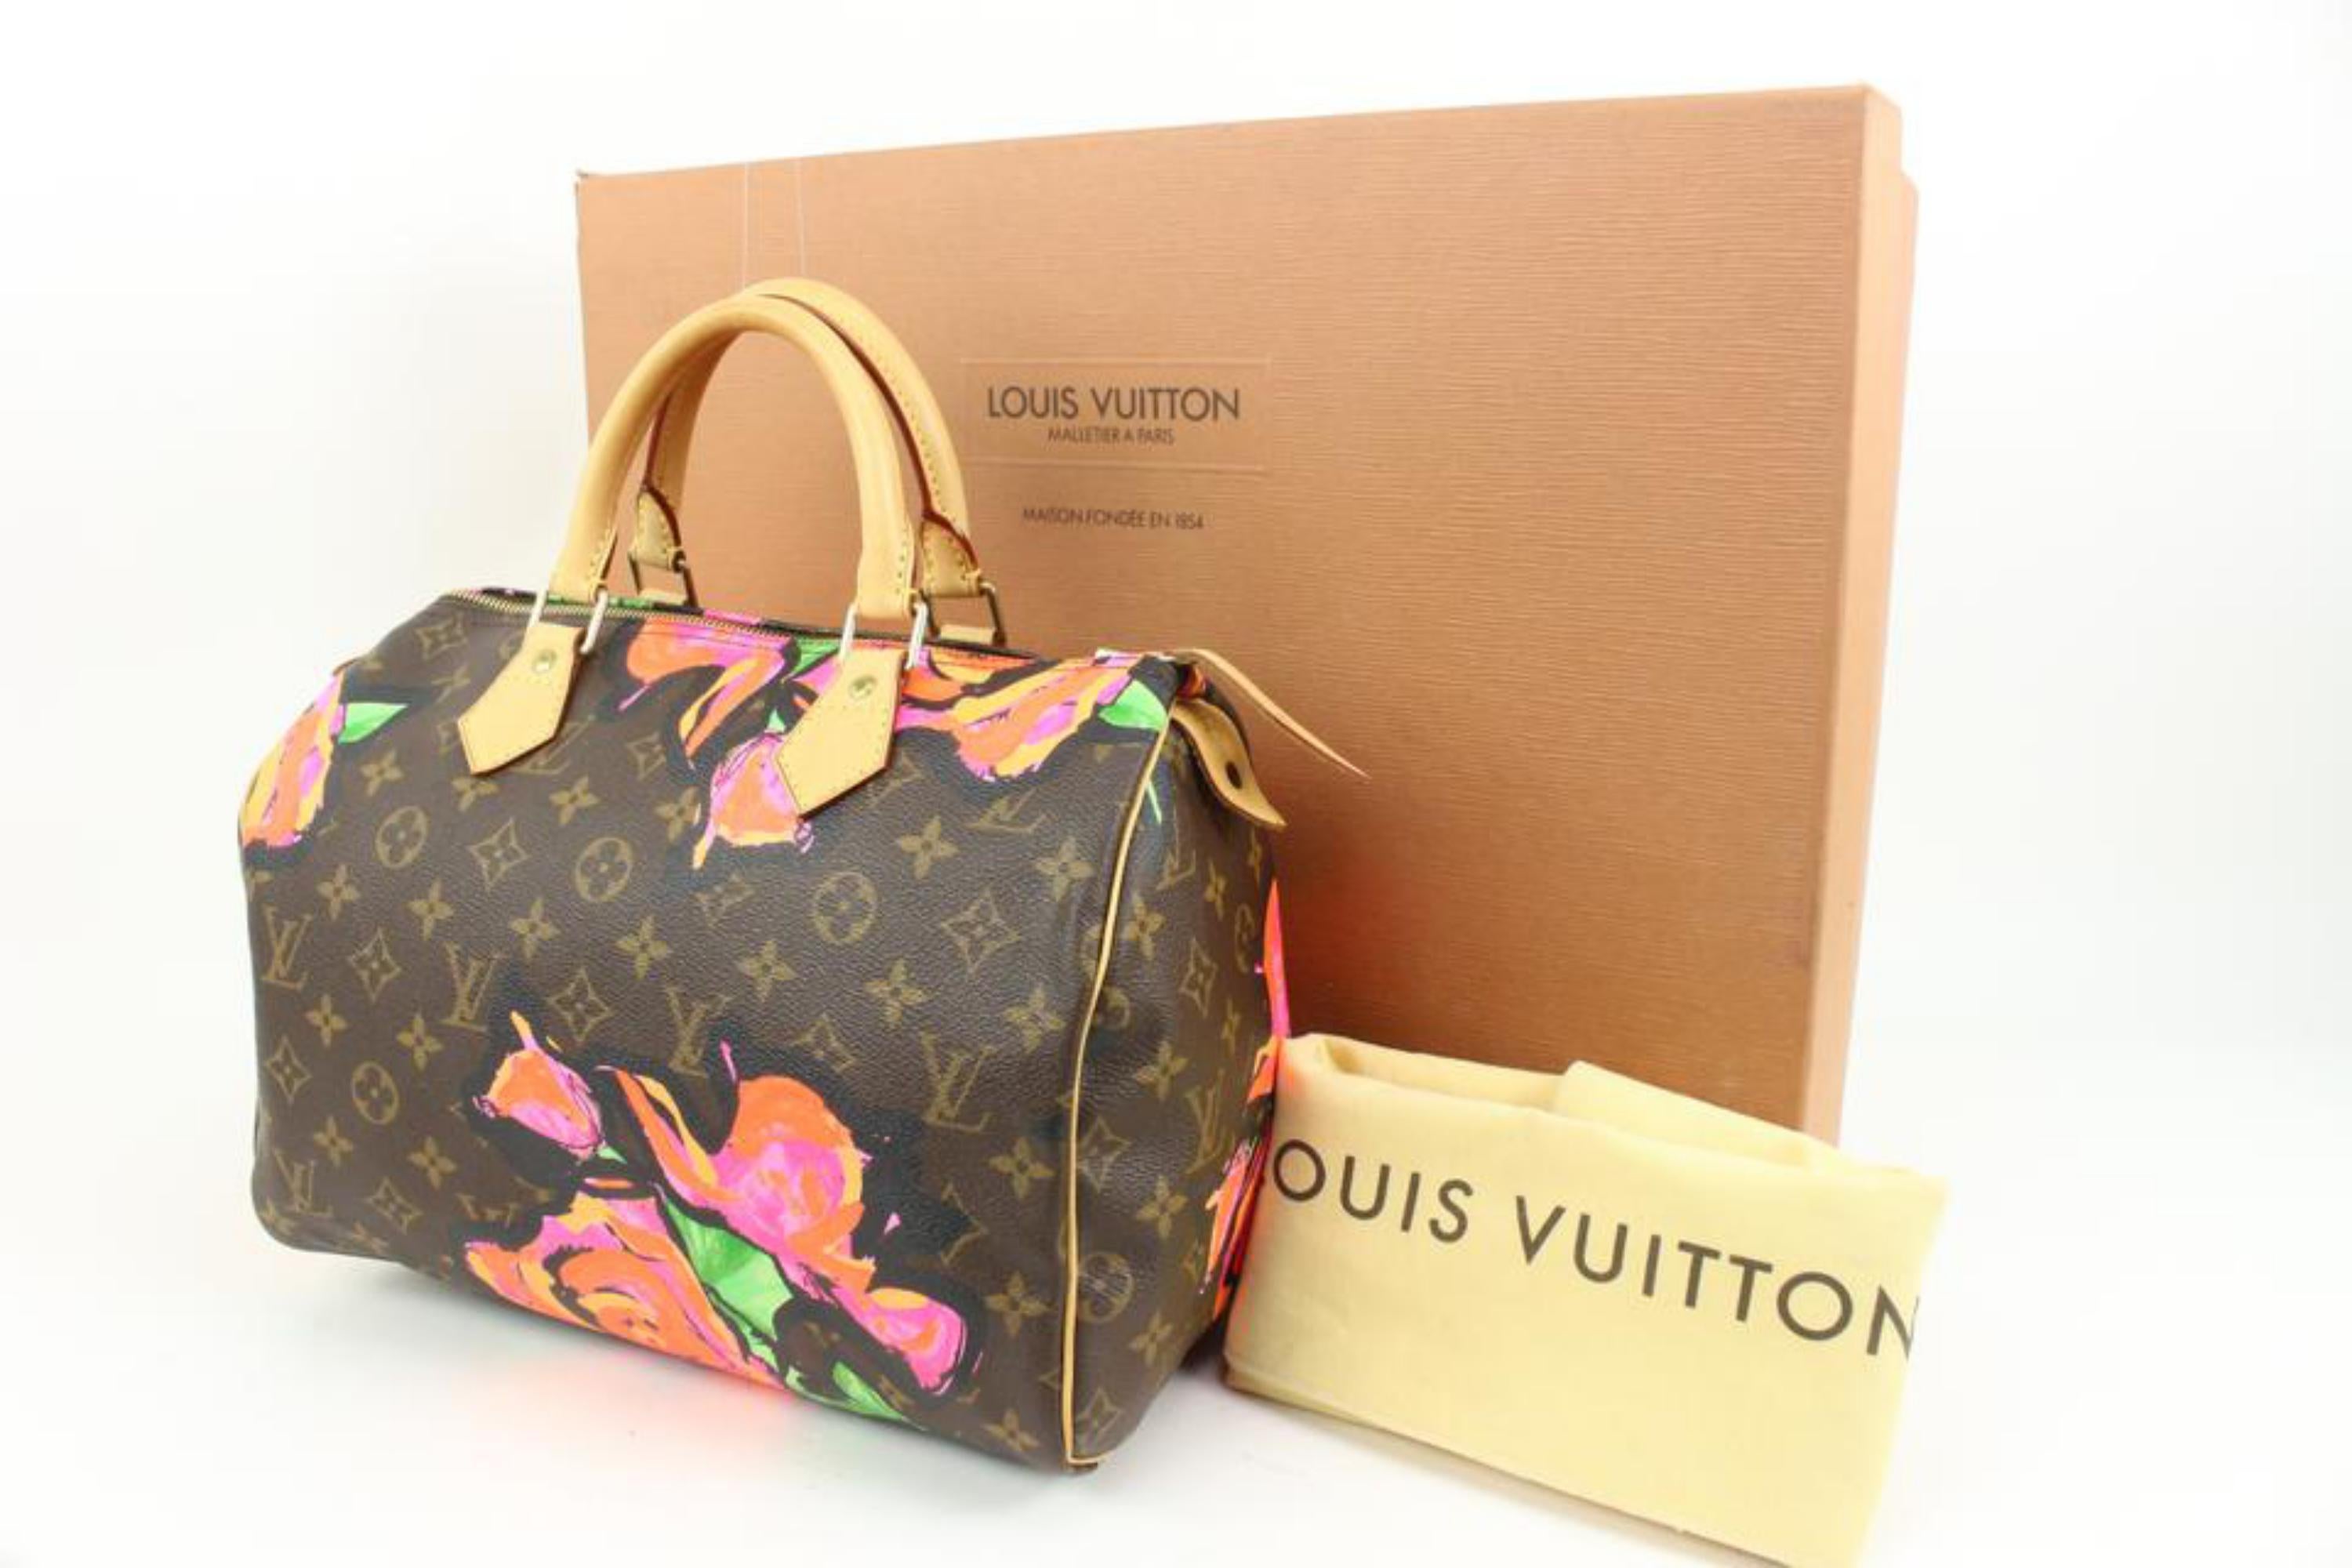 Louis Vuitton Stephen Sprouse Monogram Graffiti Roses Speedy 30 93lz419s
Date Code/Serial Number: SP5008
Made In: France
Measurements: Length:  12